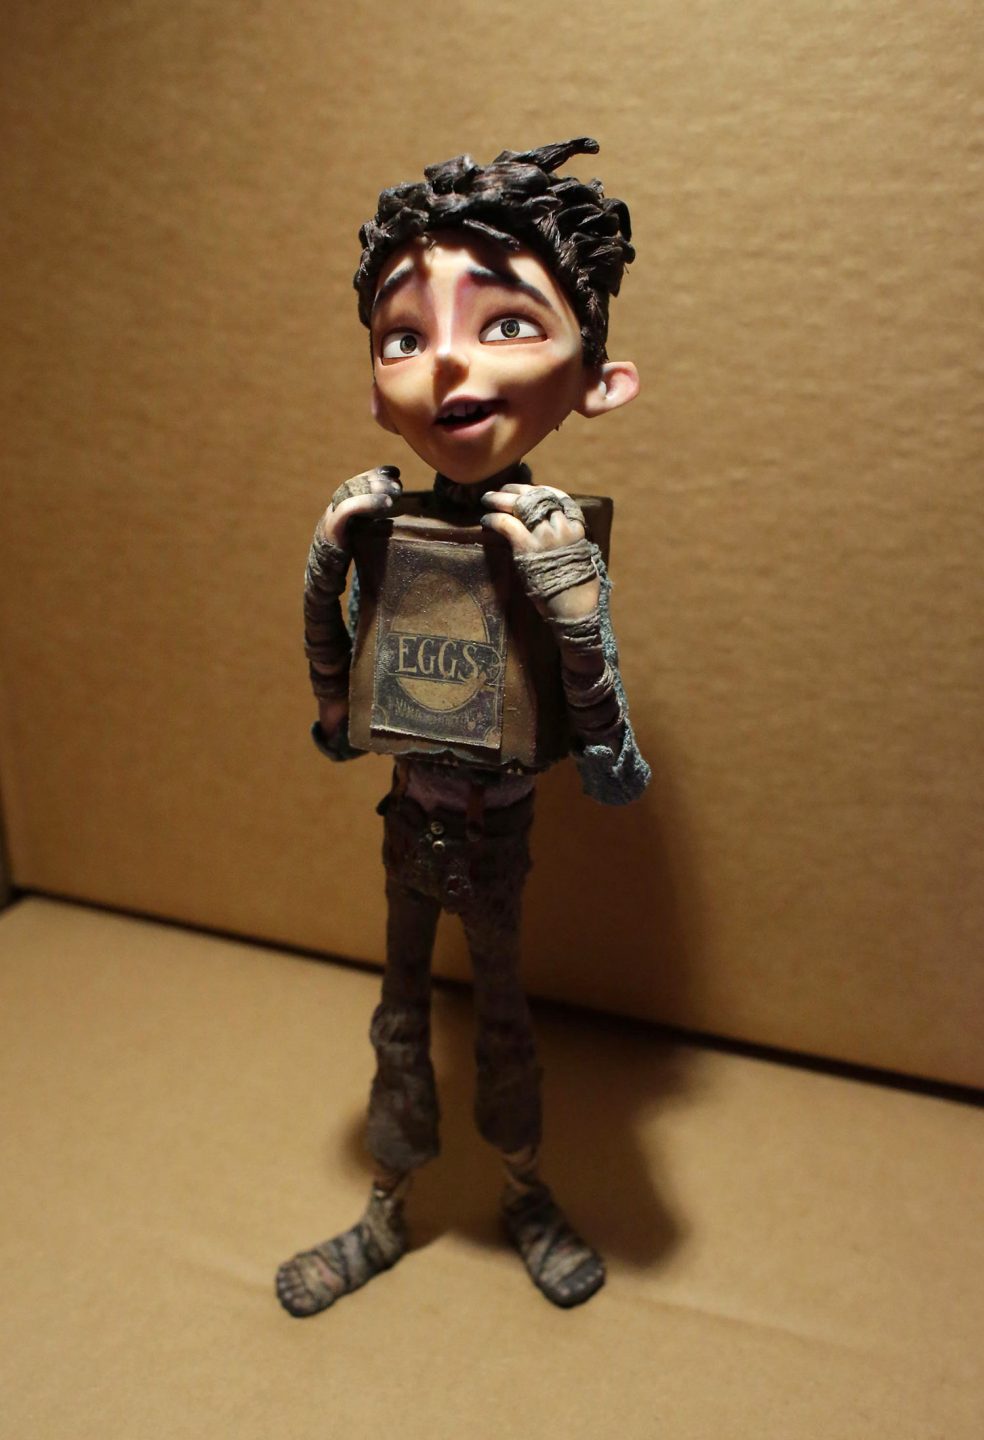 From Coraline to Kubo: A Magical LAIKA Experience